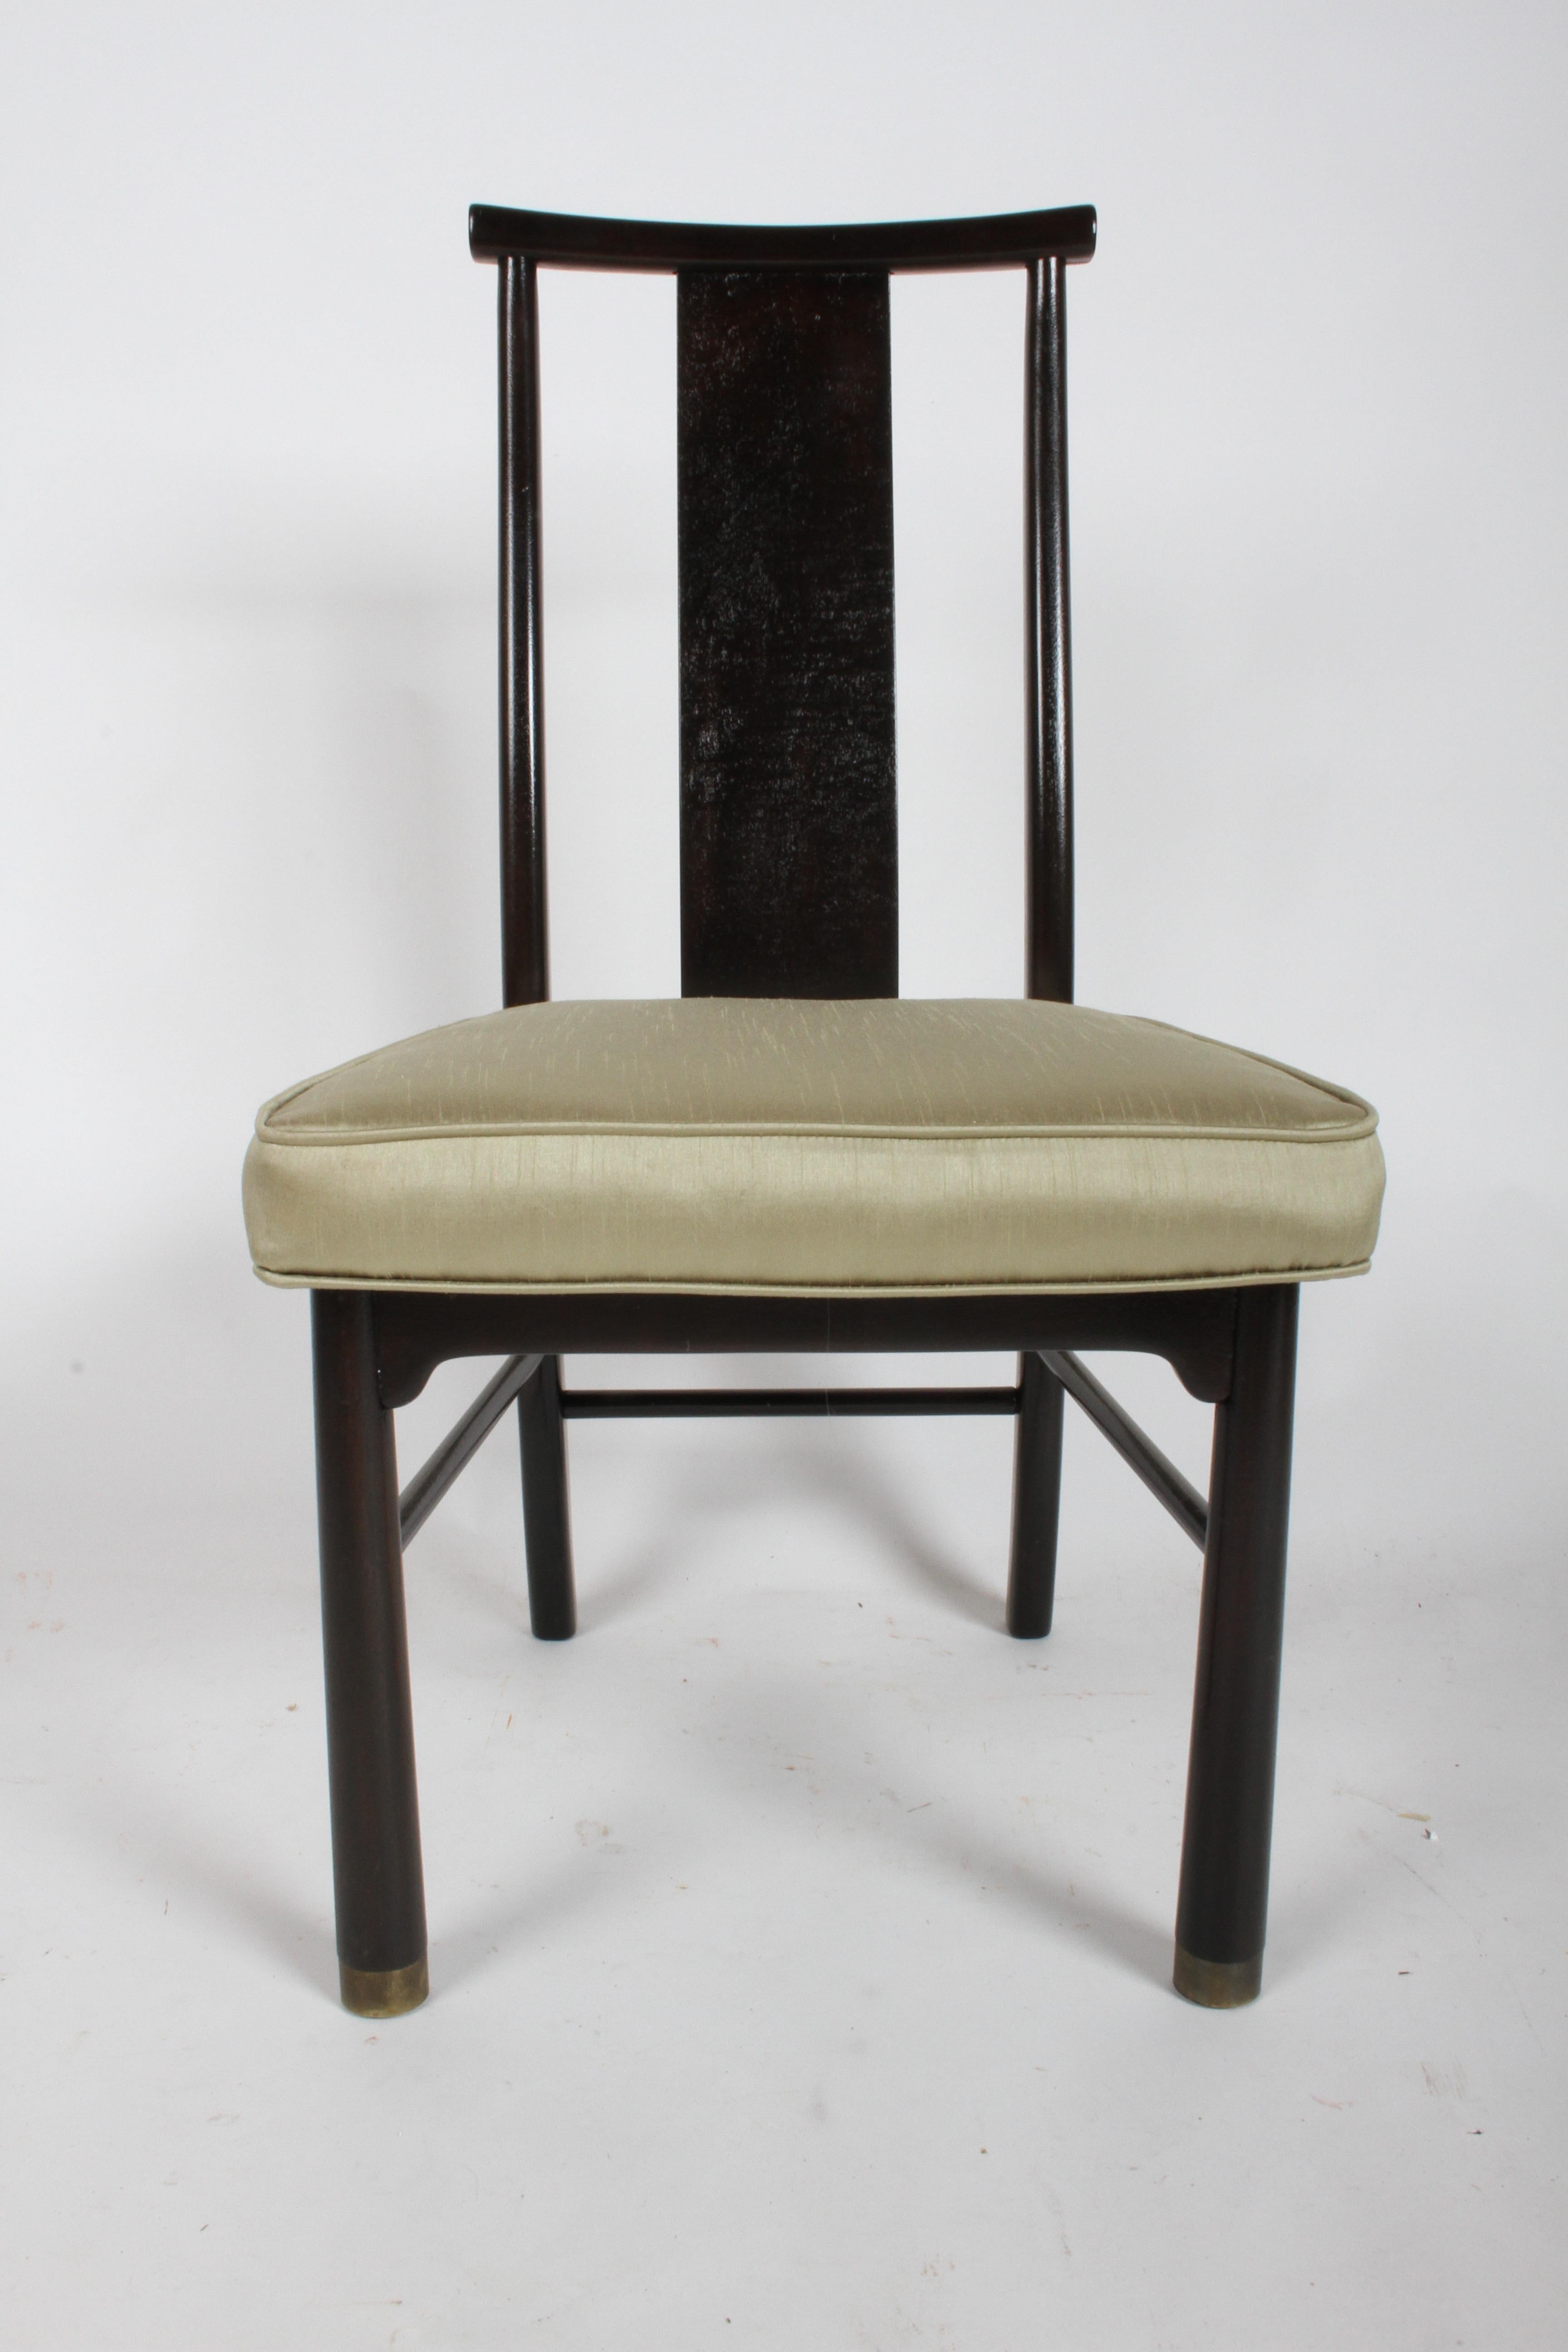 Set of four Asian Mid-Century Modern dining side chairs by Henredon. Mahogany frames refinished in dark espresso with brass sabots on front legs. Only one chair refinished, COM or I can provide a few choices of neutral upholstery from my inventory.